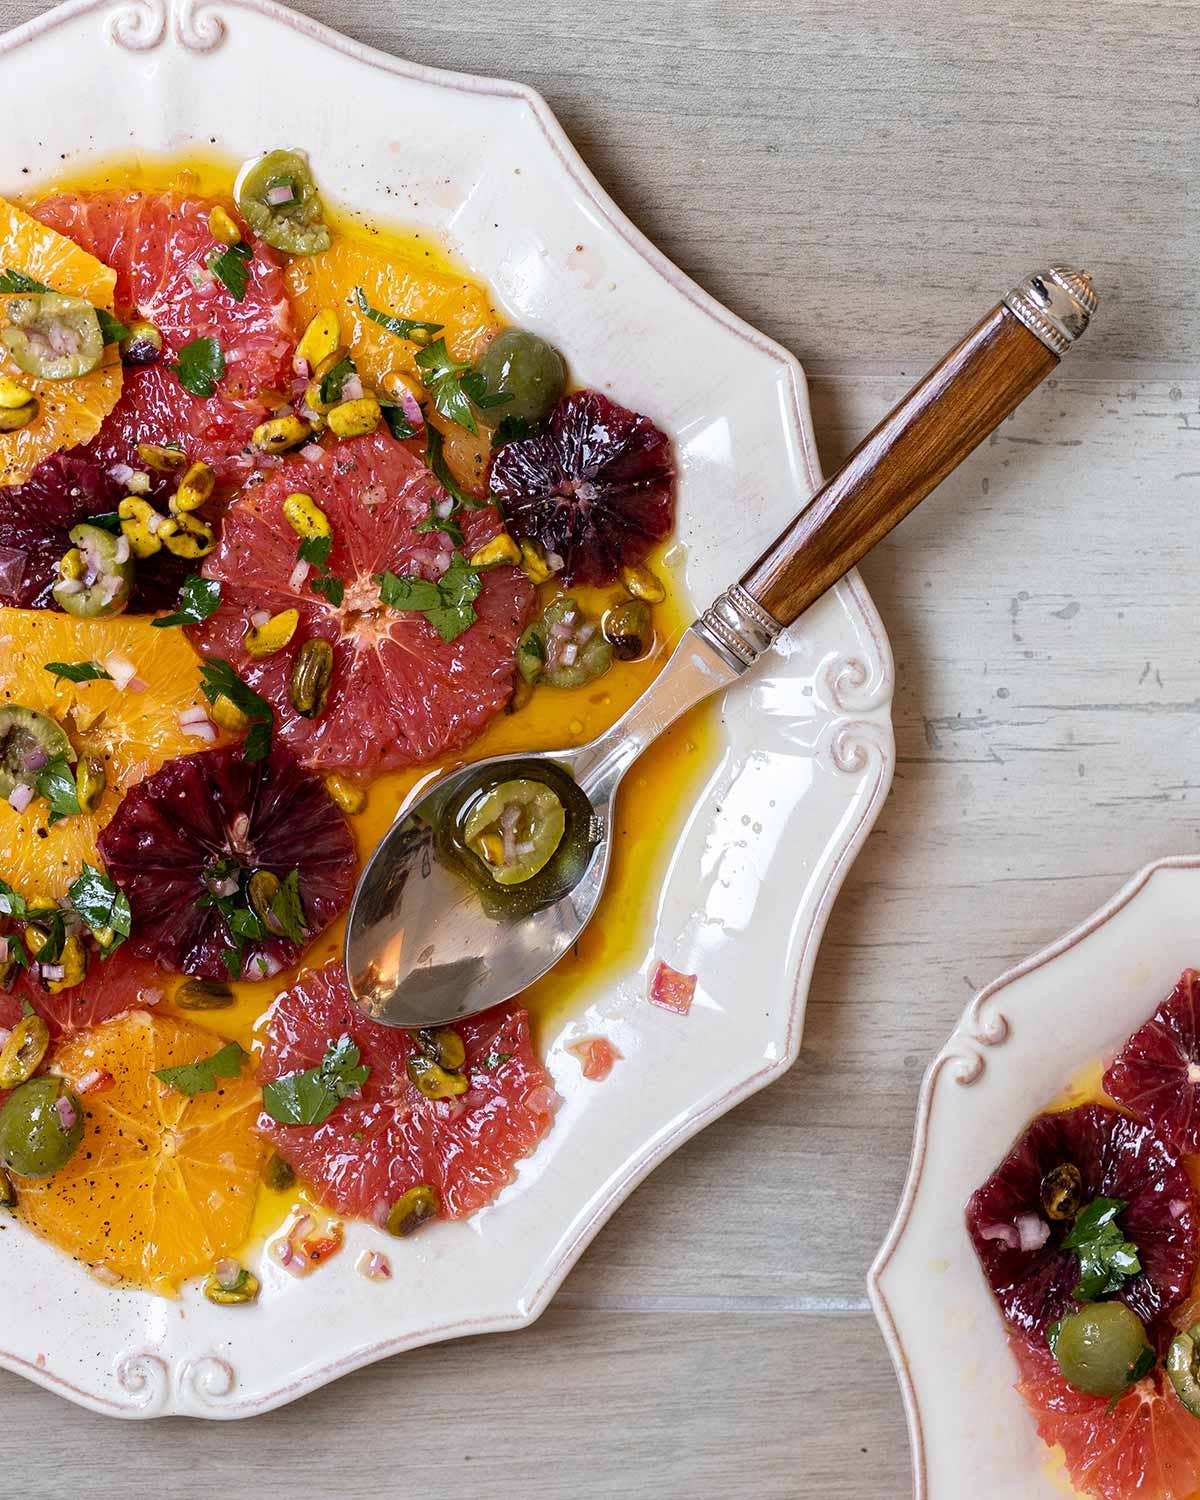 Winter citrus salad with olive oil, and briny Castelvetrano olives